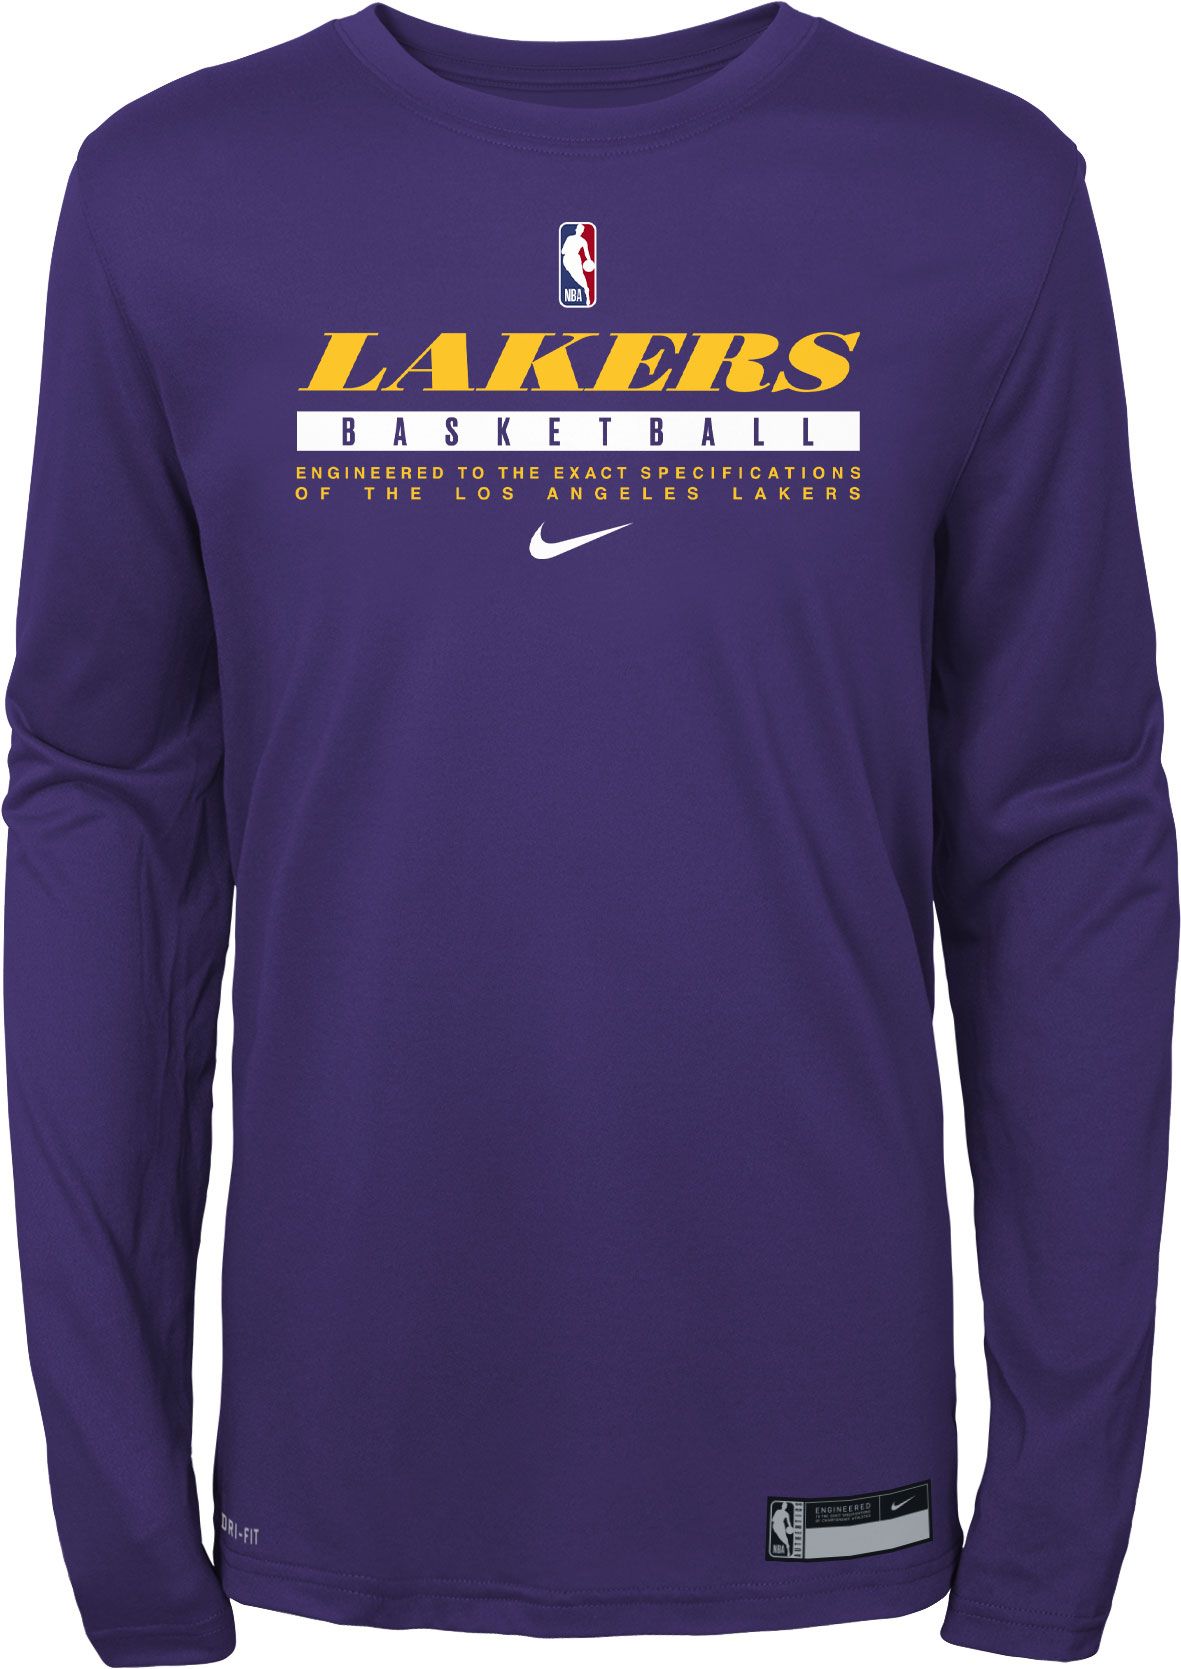 Los Angeles Lakers Women's Apparel  Curbside Pickup Available at DICK'S